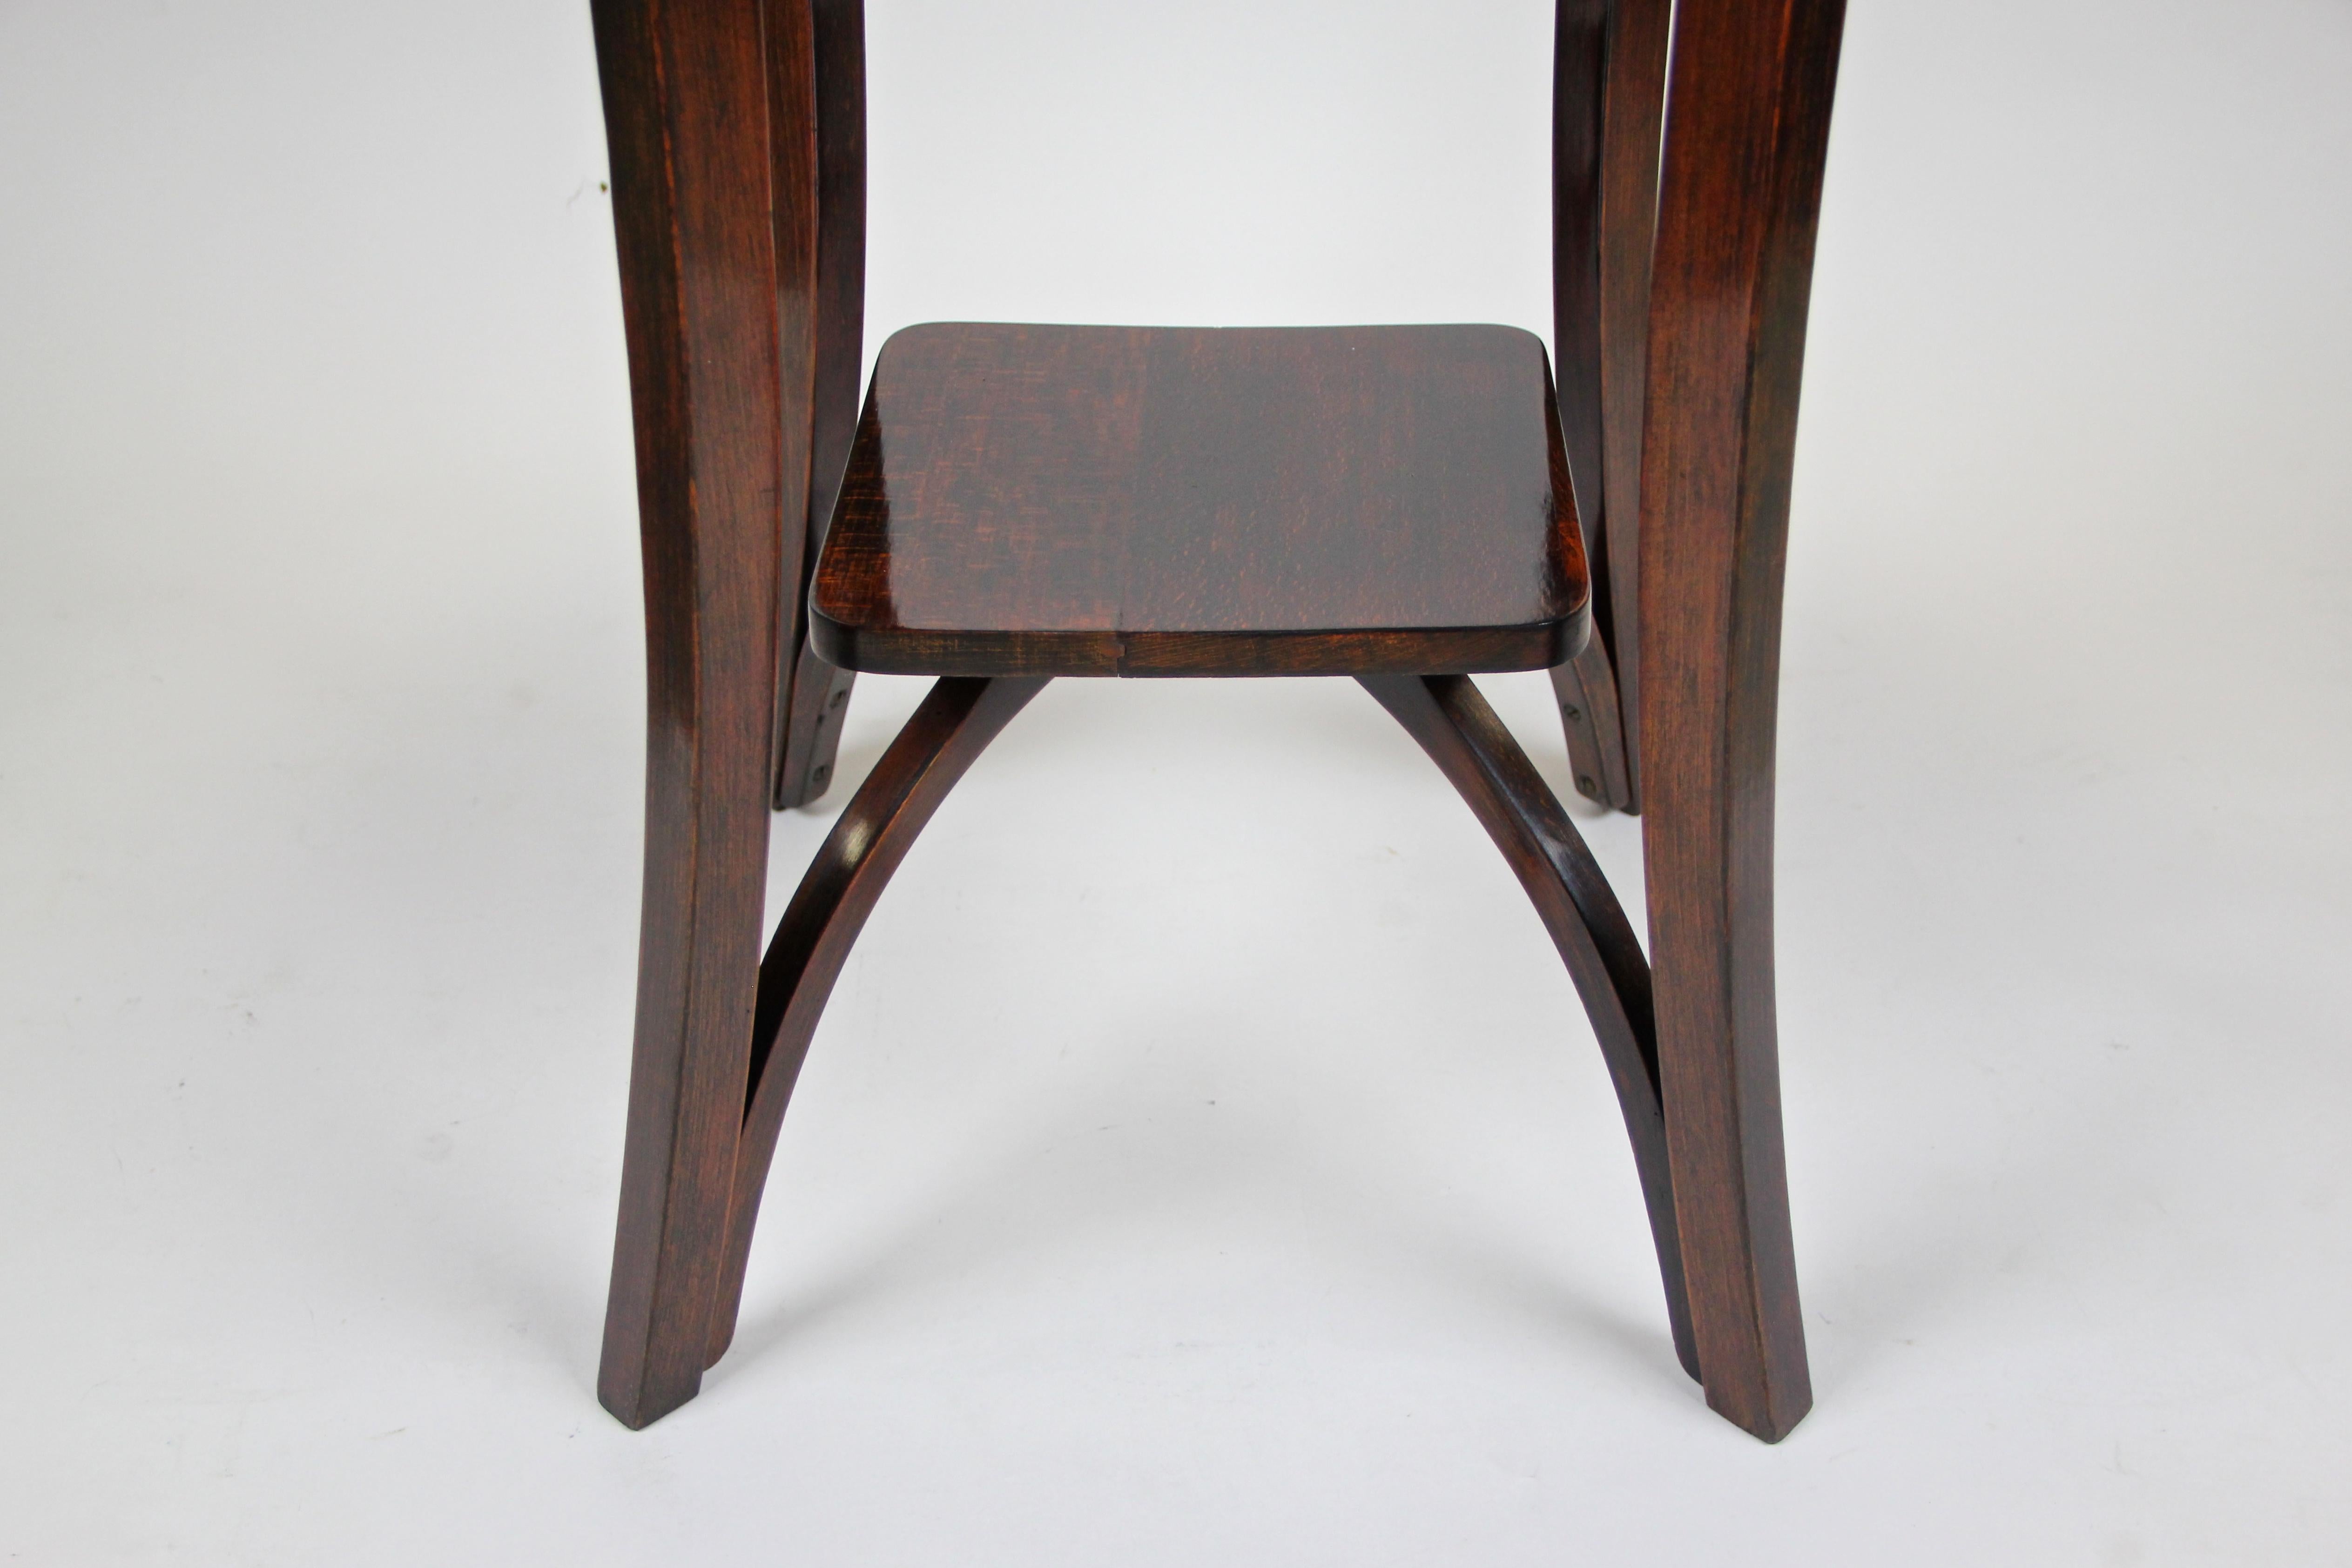 Stained Bentwood Side Table by Thonet Vienna Art Nouveau, Austria, circa 1905